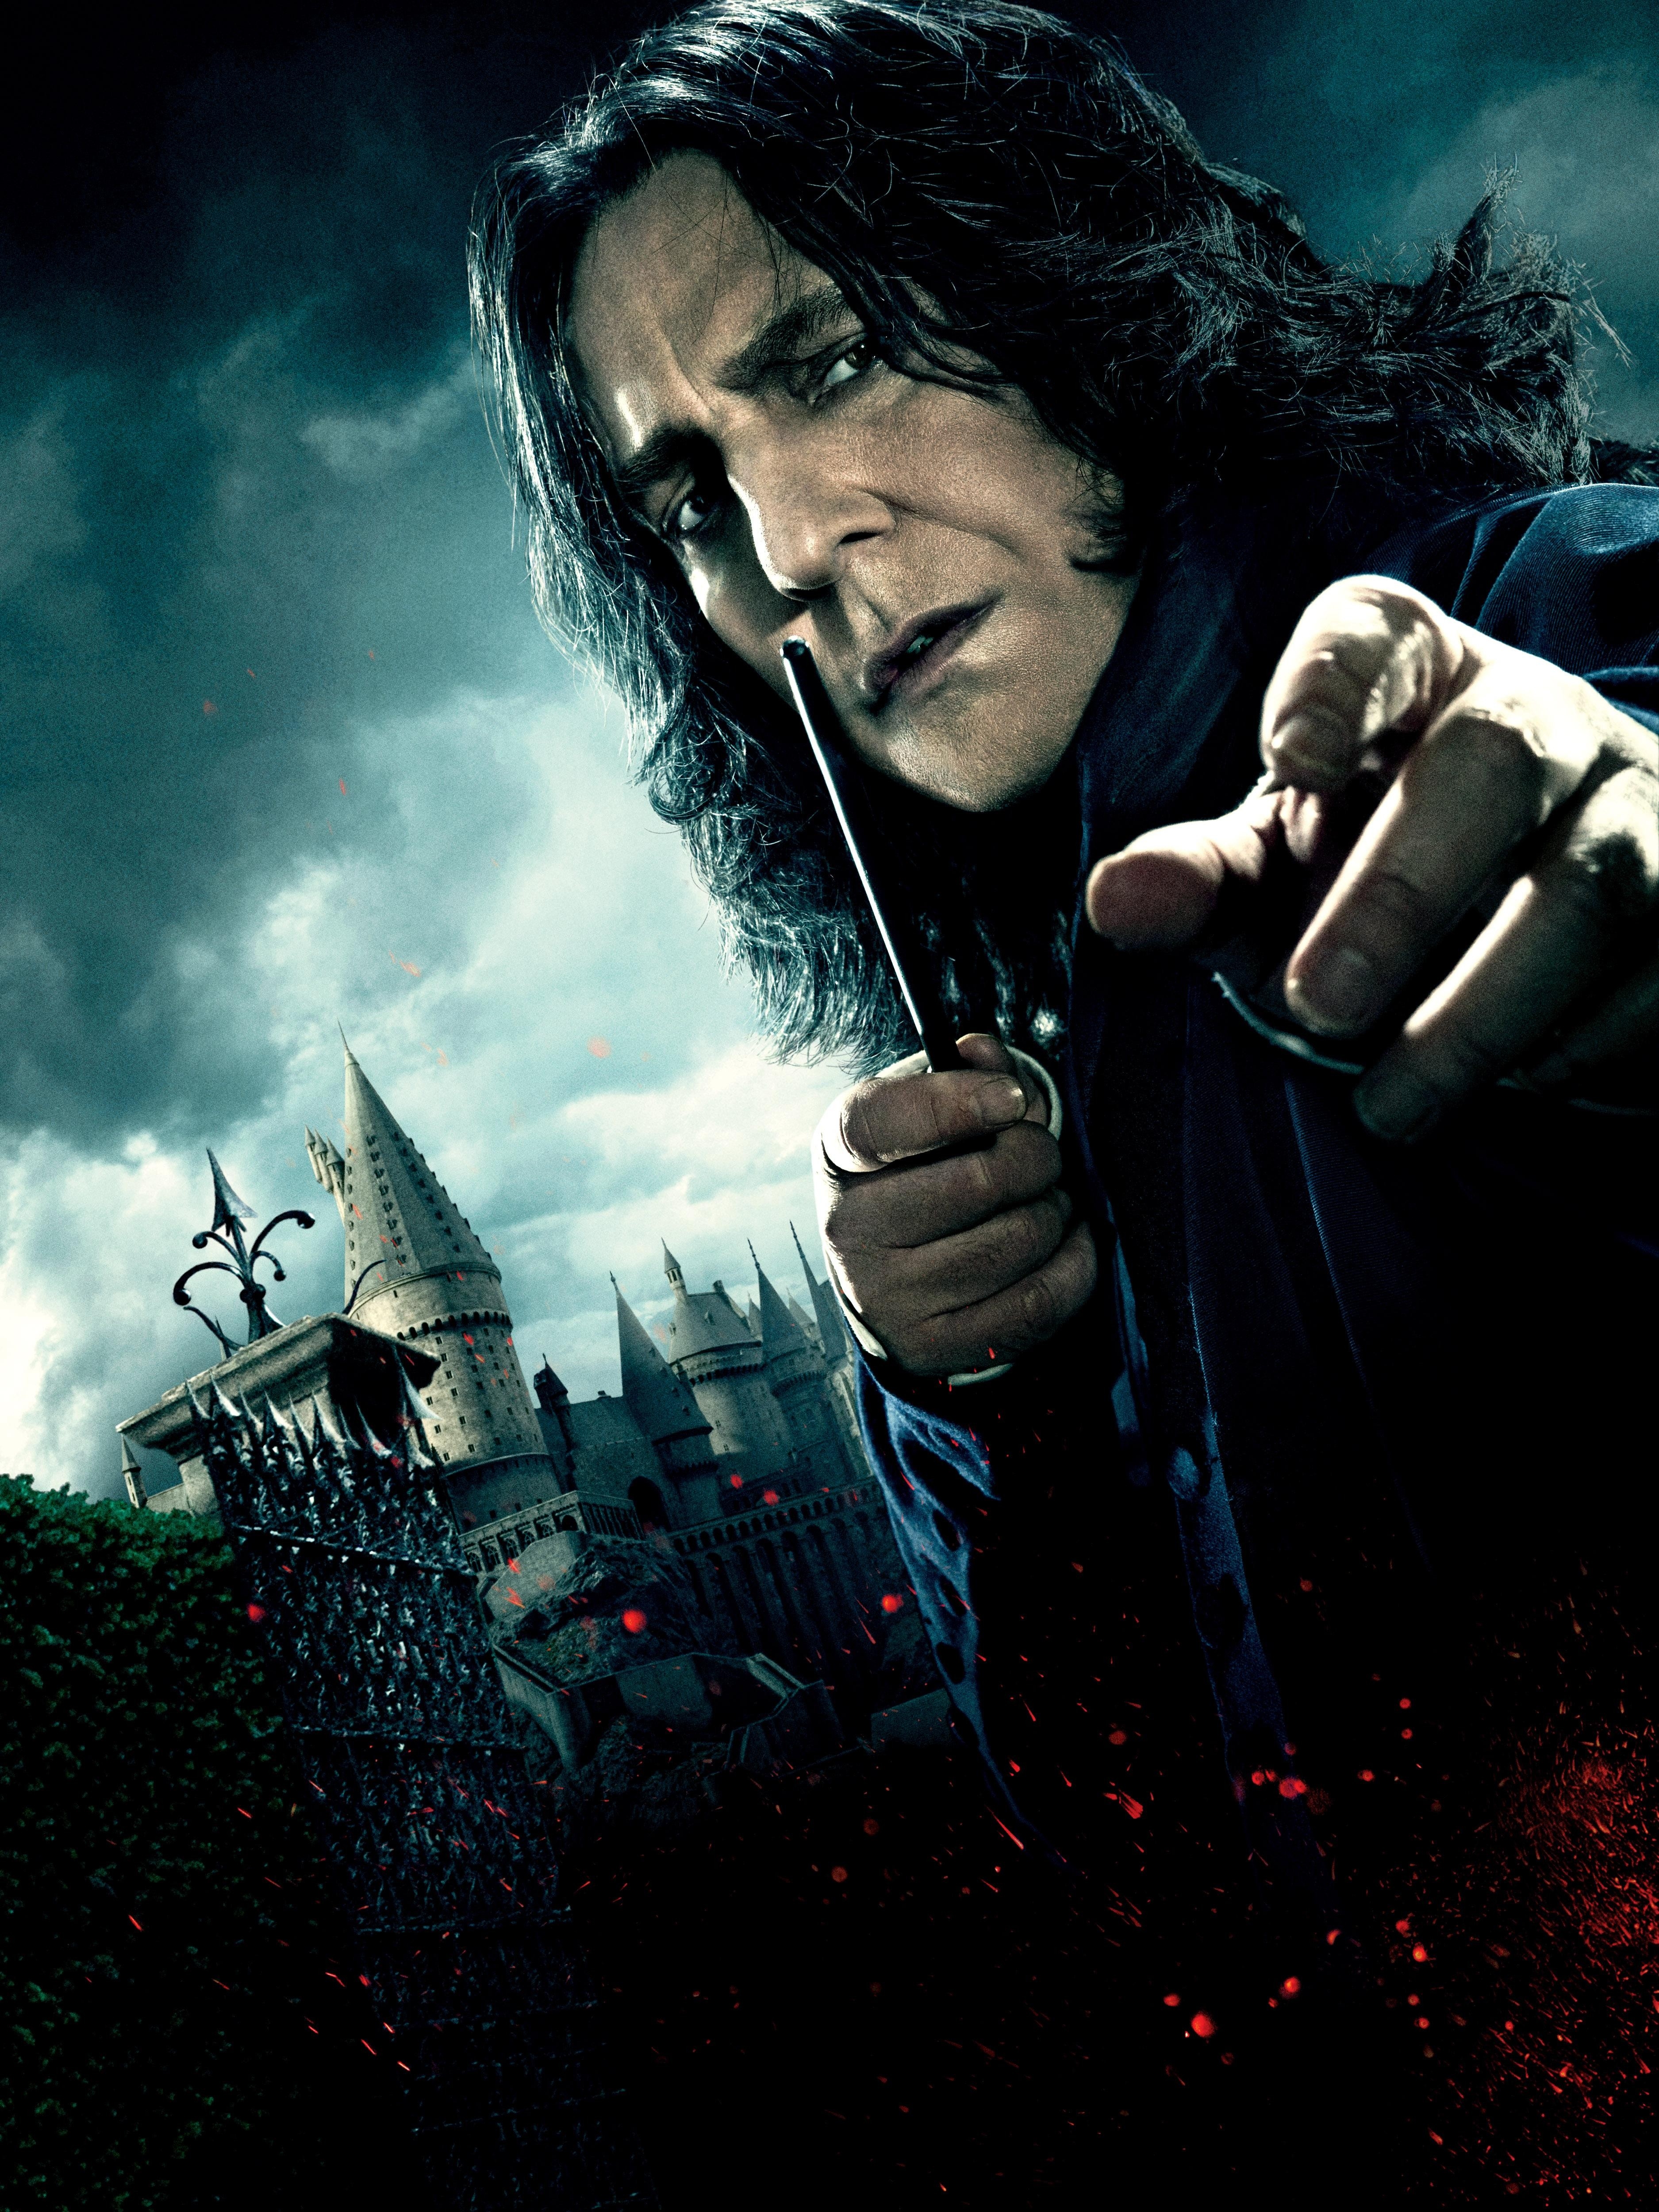 harry potter harry potter and the deathly hallows alan rickman severus snape 3750x5000 wallpaper High Quality Wallpaper, High Definition Wallpaper